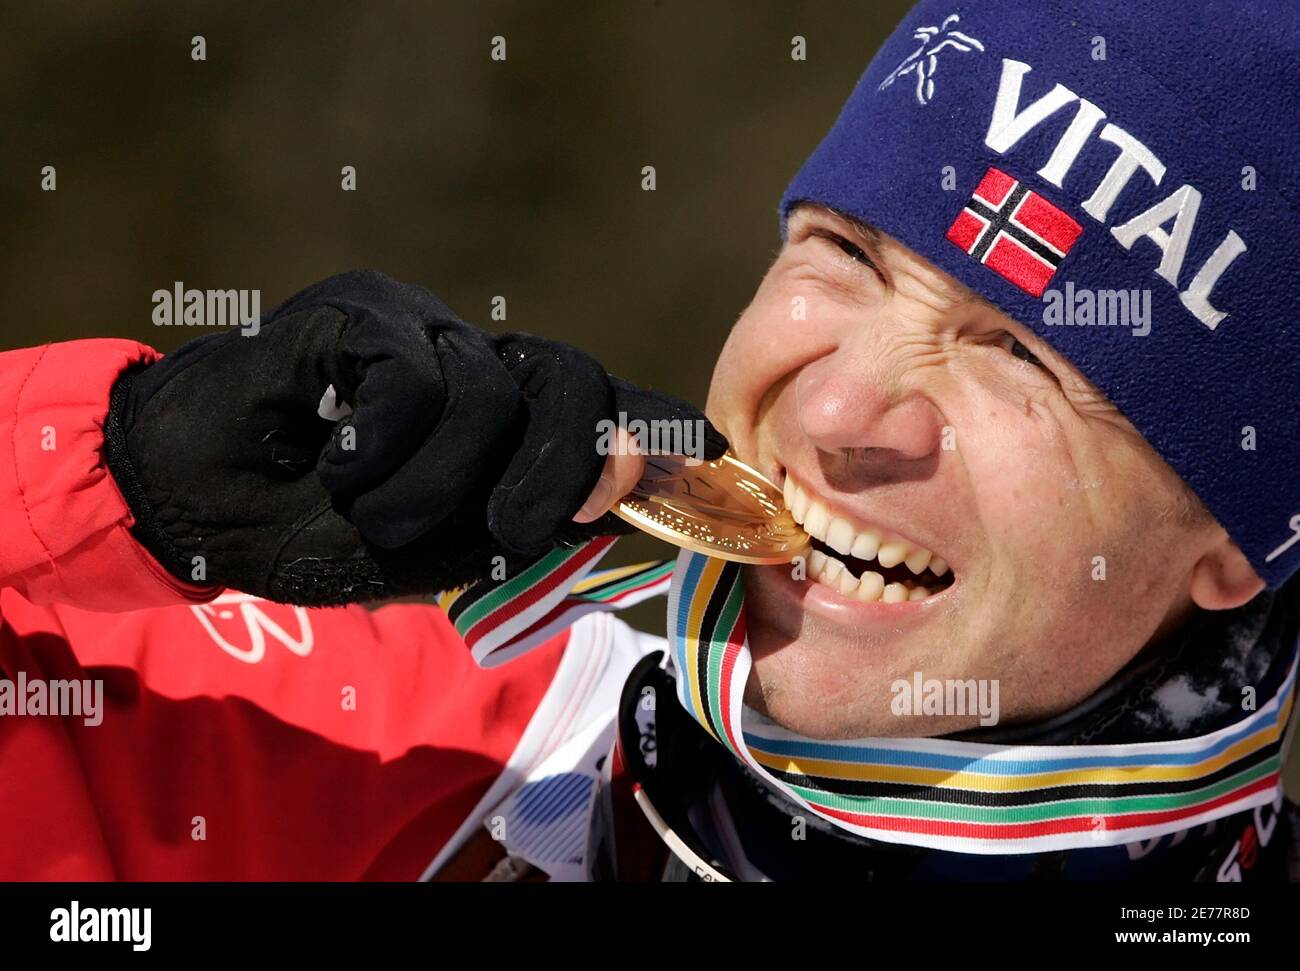 World Champion Ole Einar Bjoerndalen of Norway poses with his gold medal at  the end of the men's 10 km sprint race competition at the Biathlon World  Championship in the northern Italy